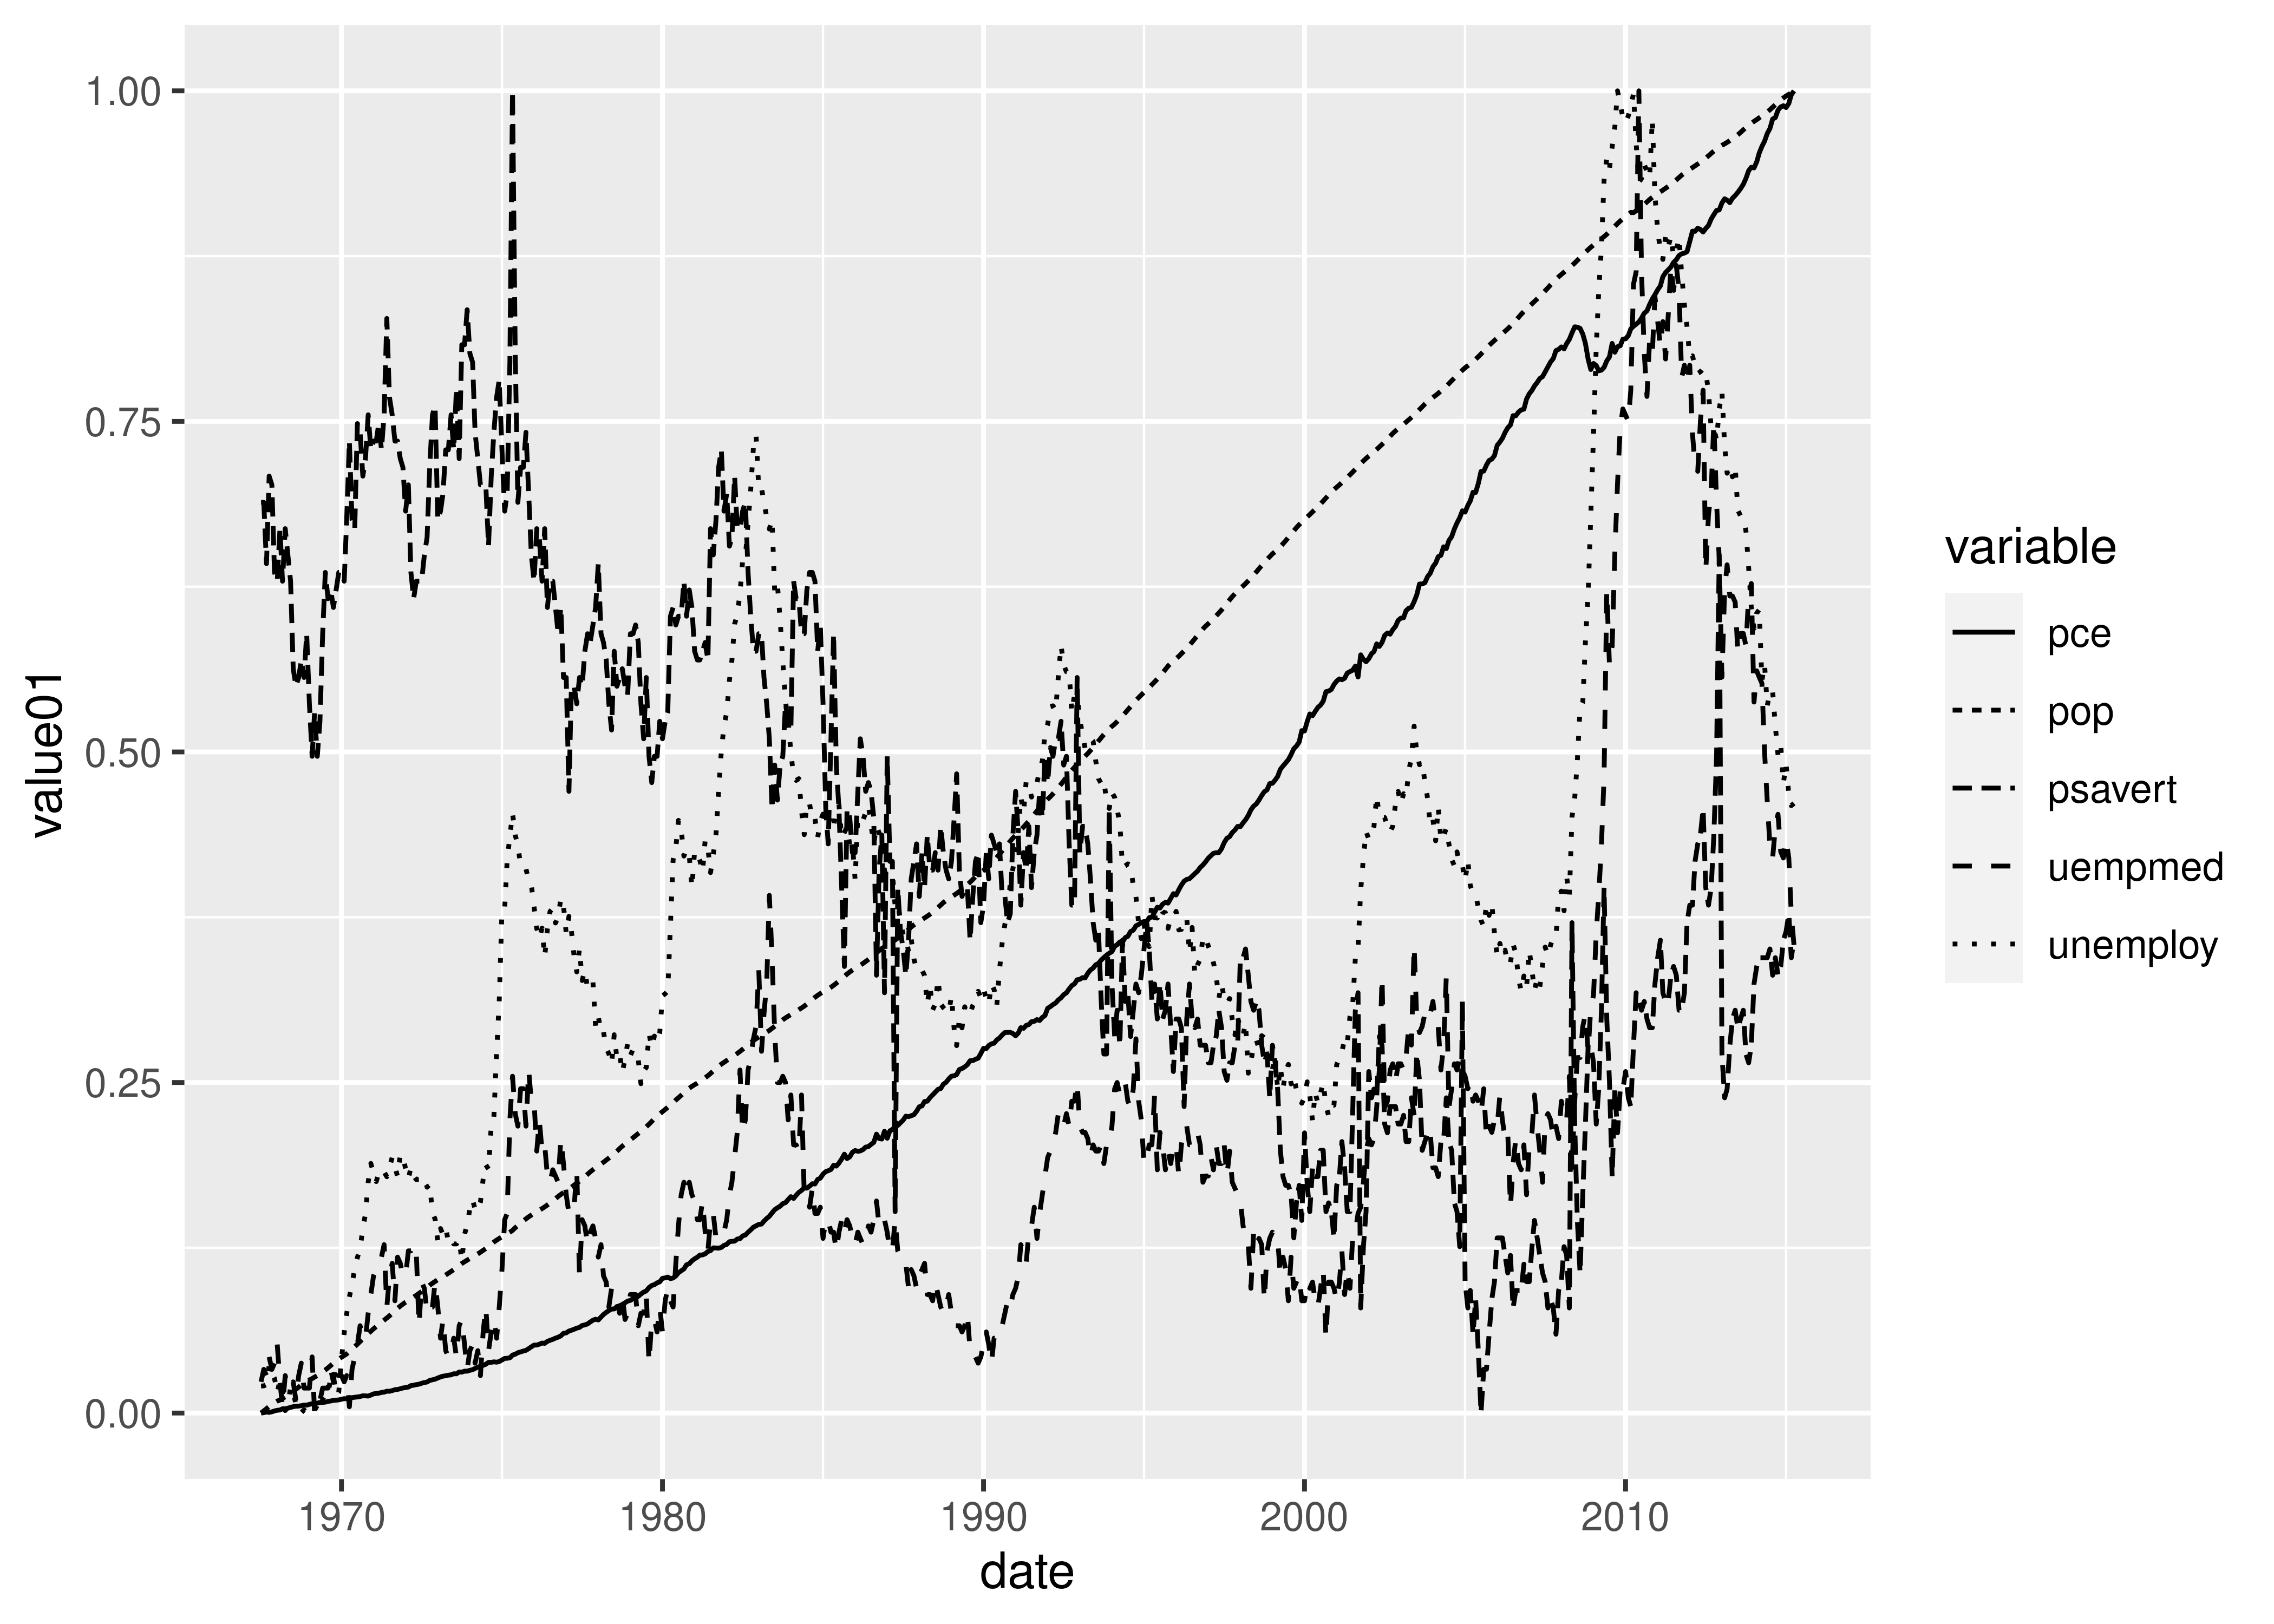 https://ggplot2-book.org/scales-other_files/figure-html/unnamed-chunk-16-1.png